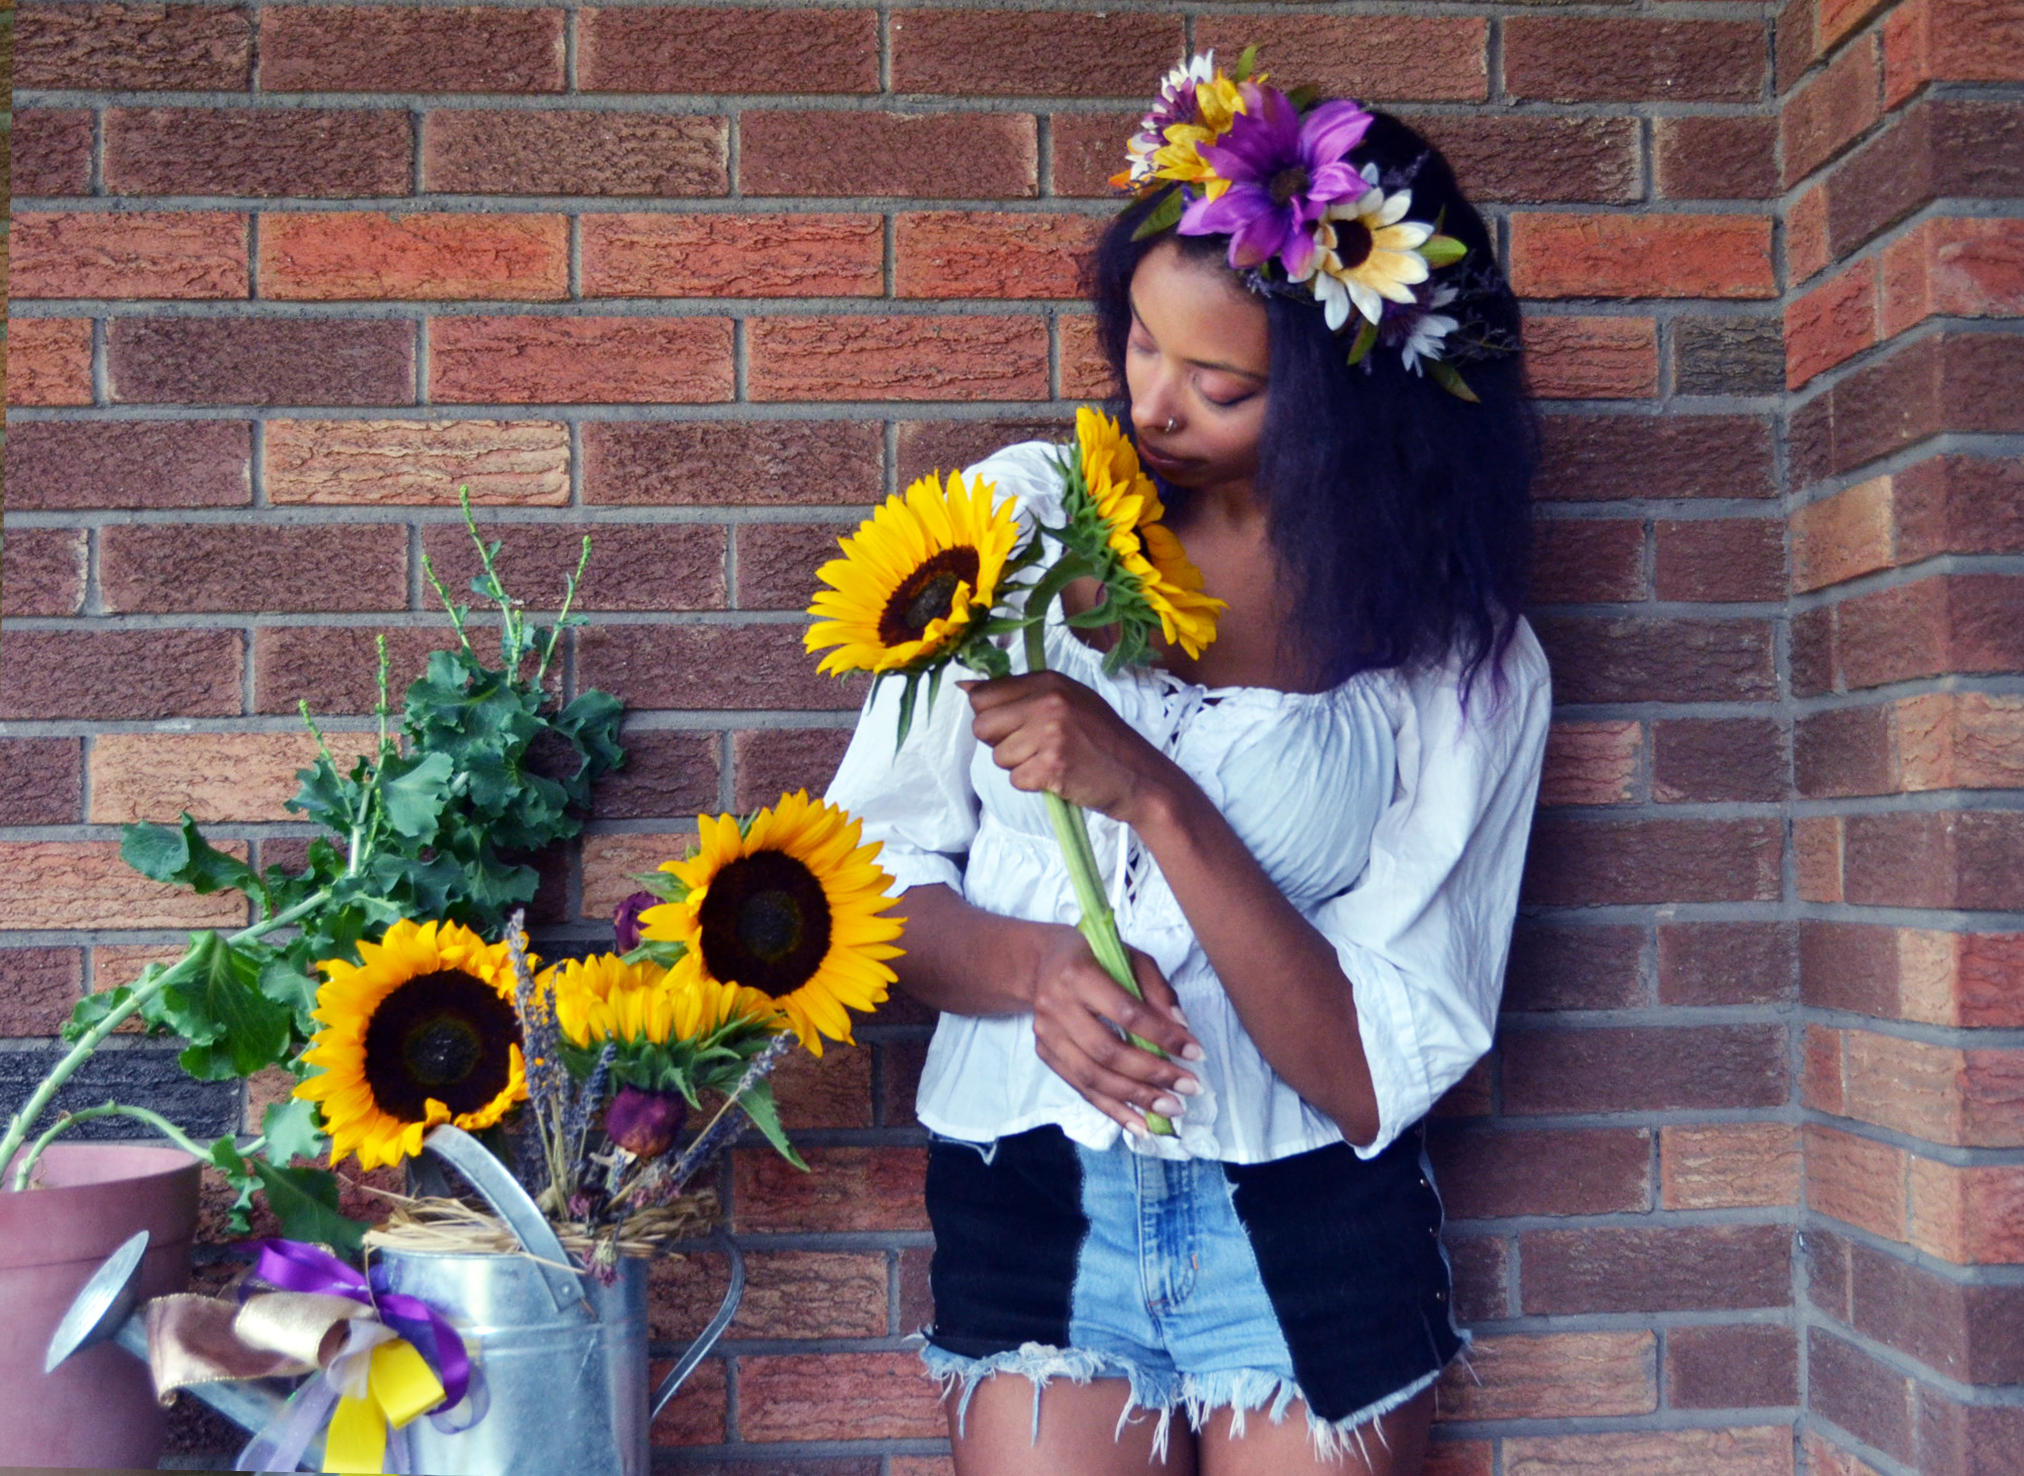 Woman with flower crown and sunflowers.